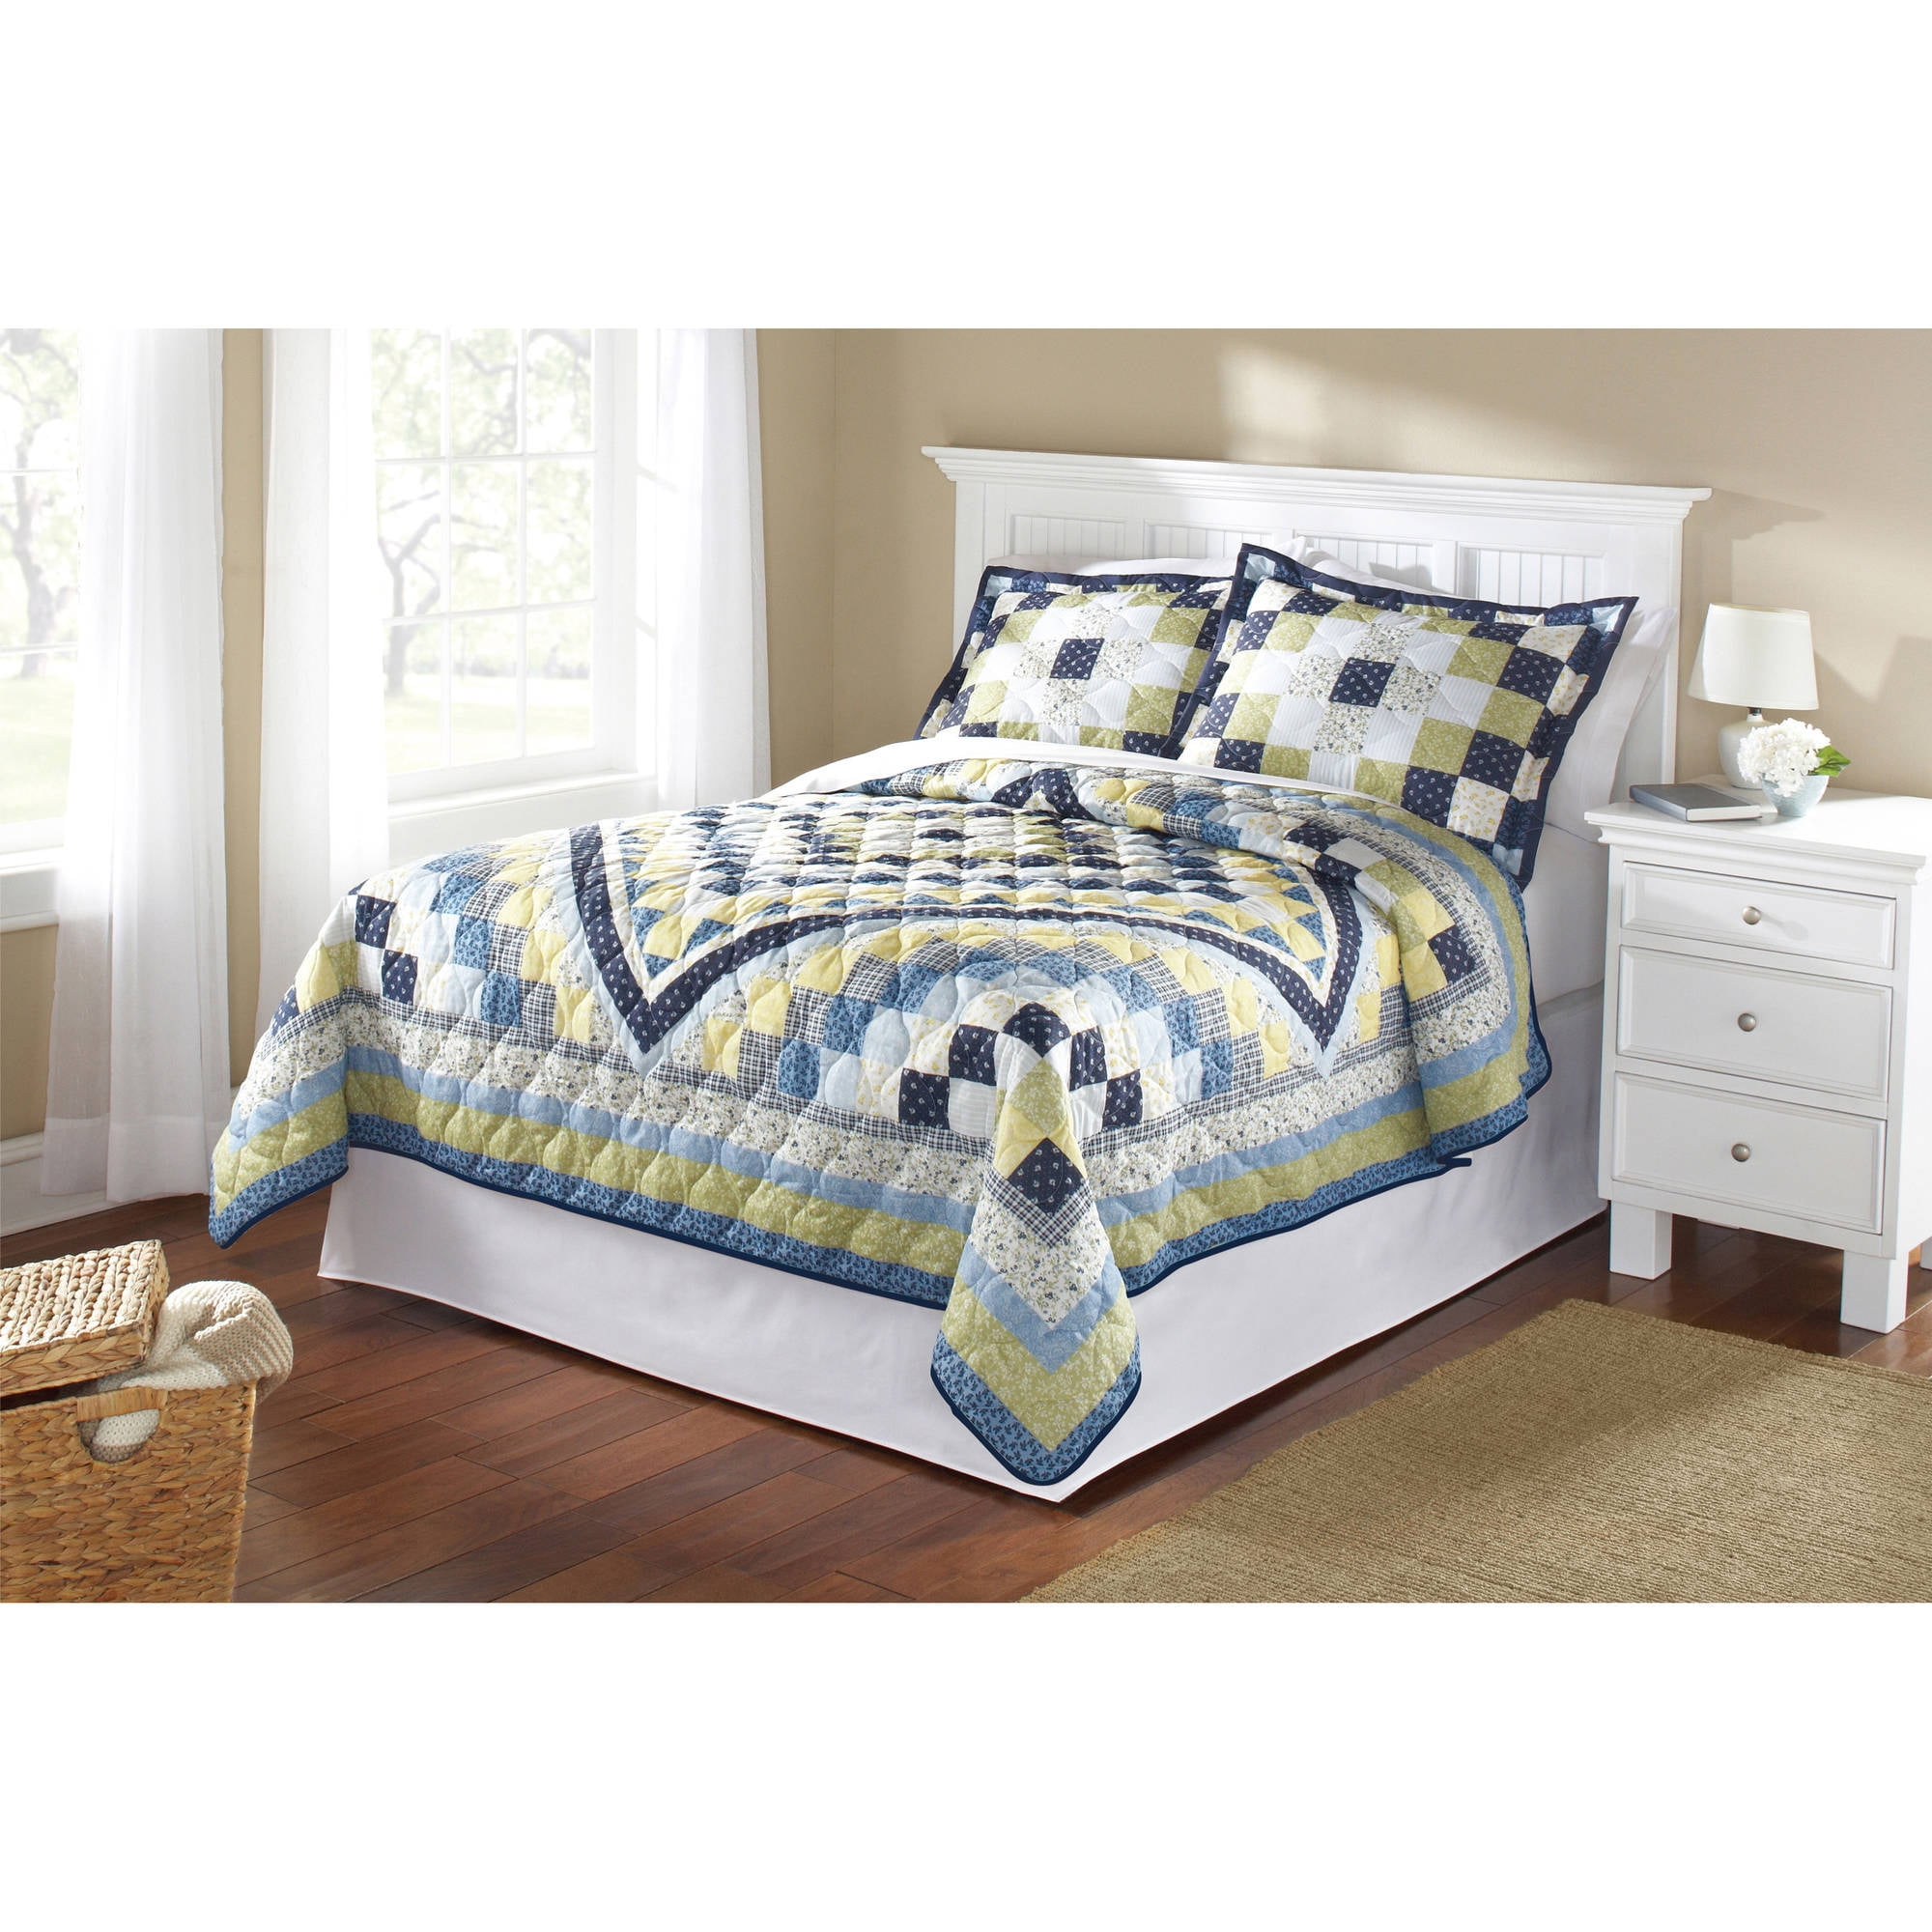 Mainstays Blue Patchwork Quilt Collection